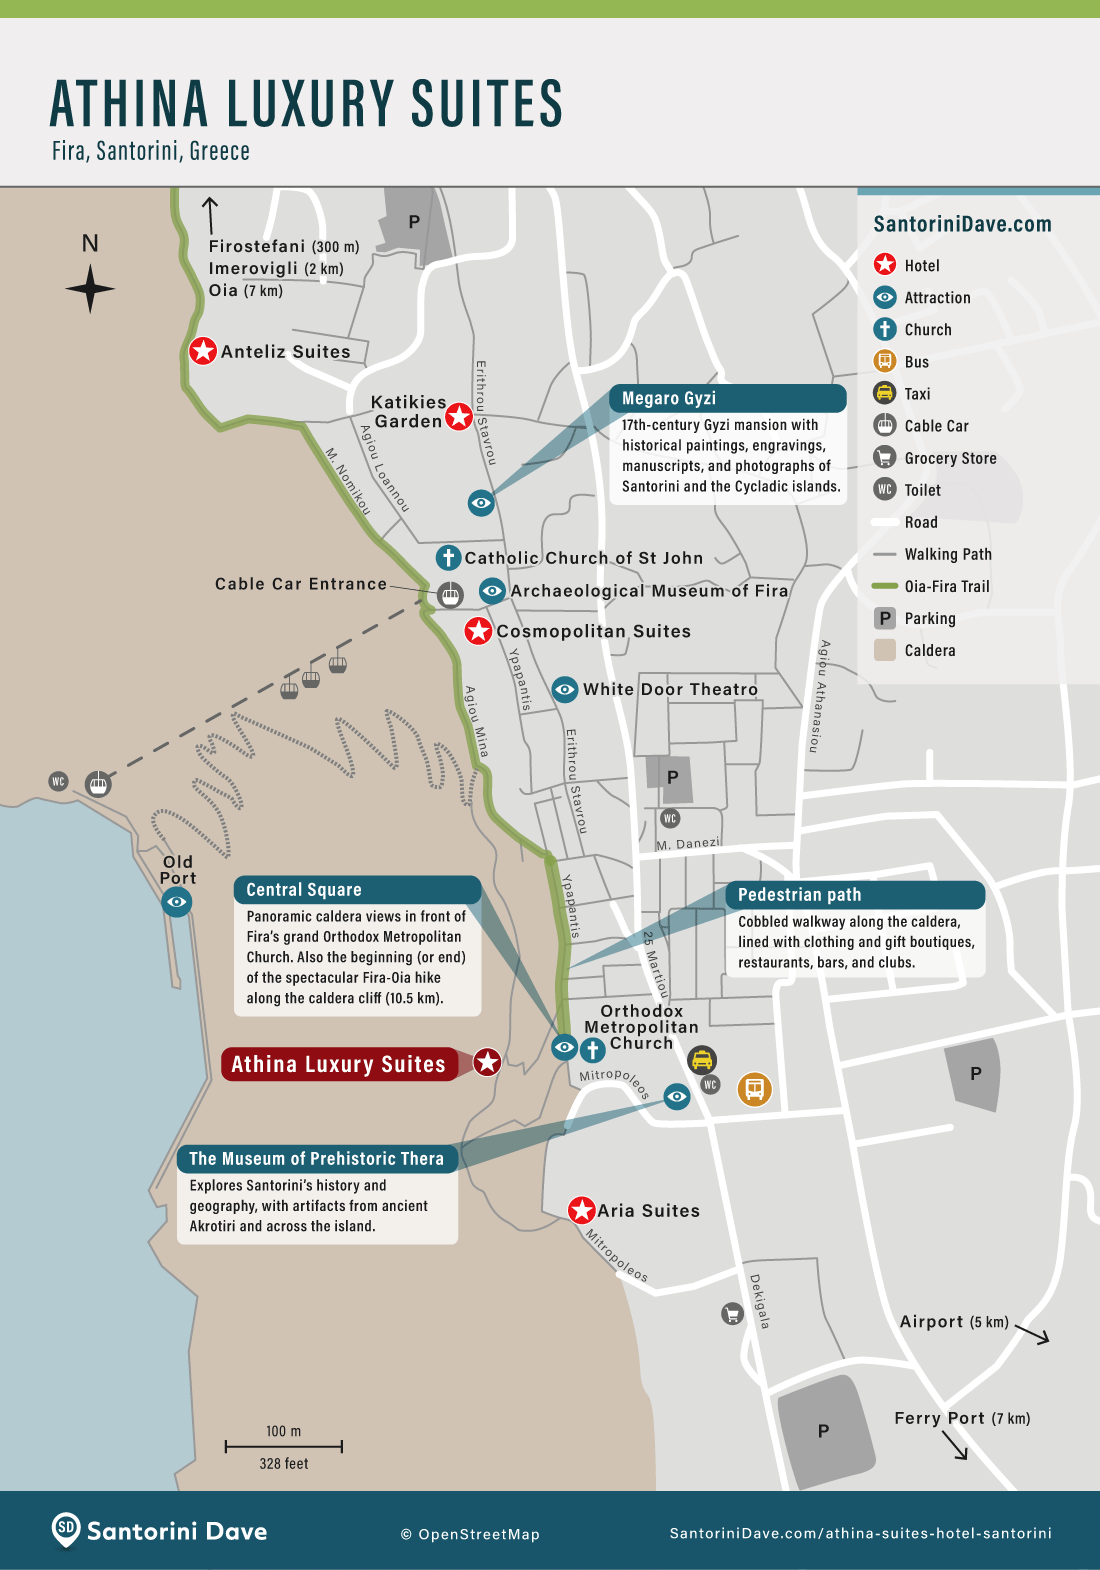 Map of Athina Luxury Suites in Fira.